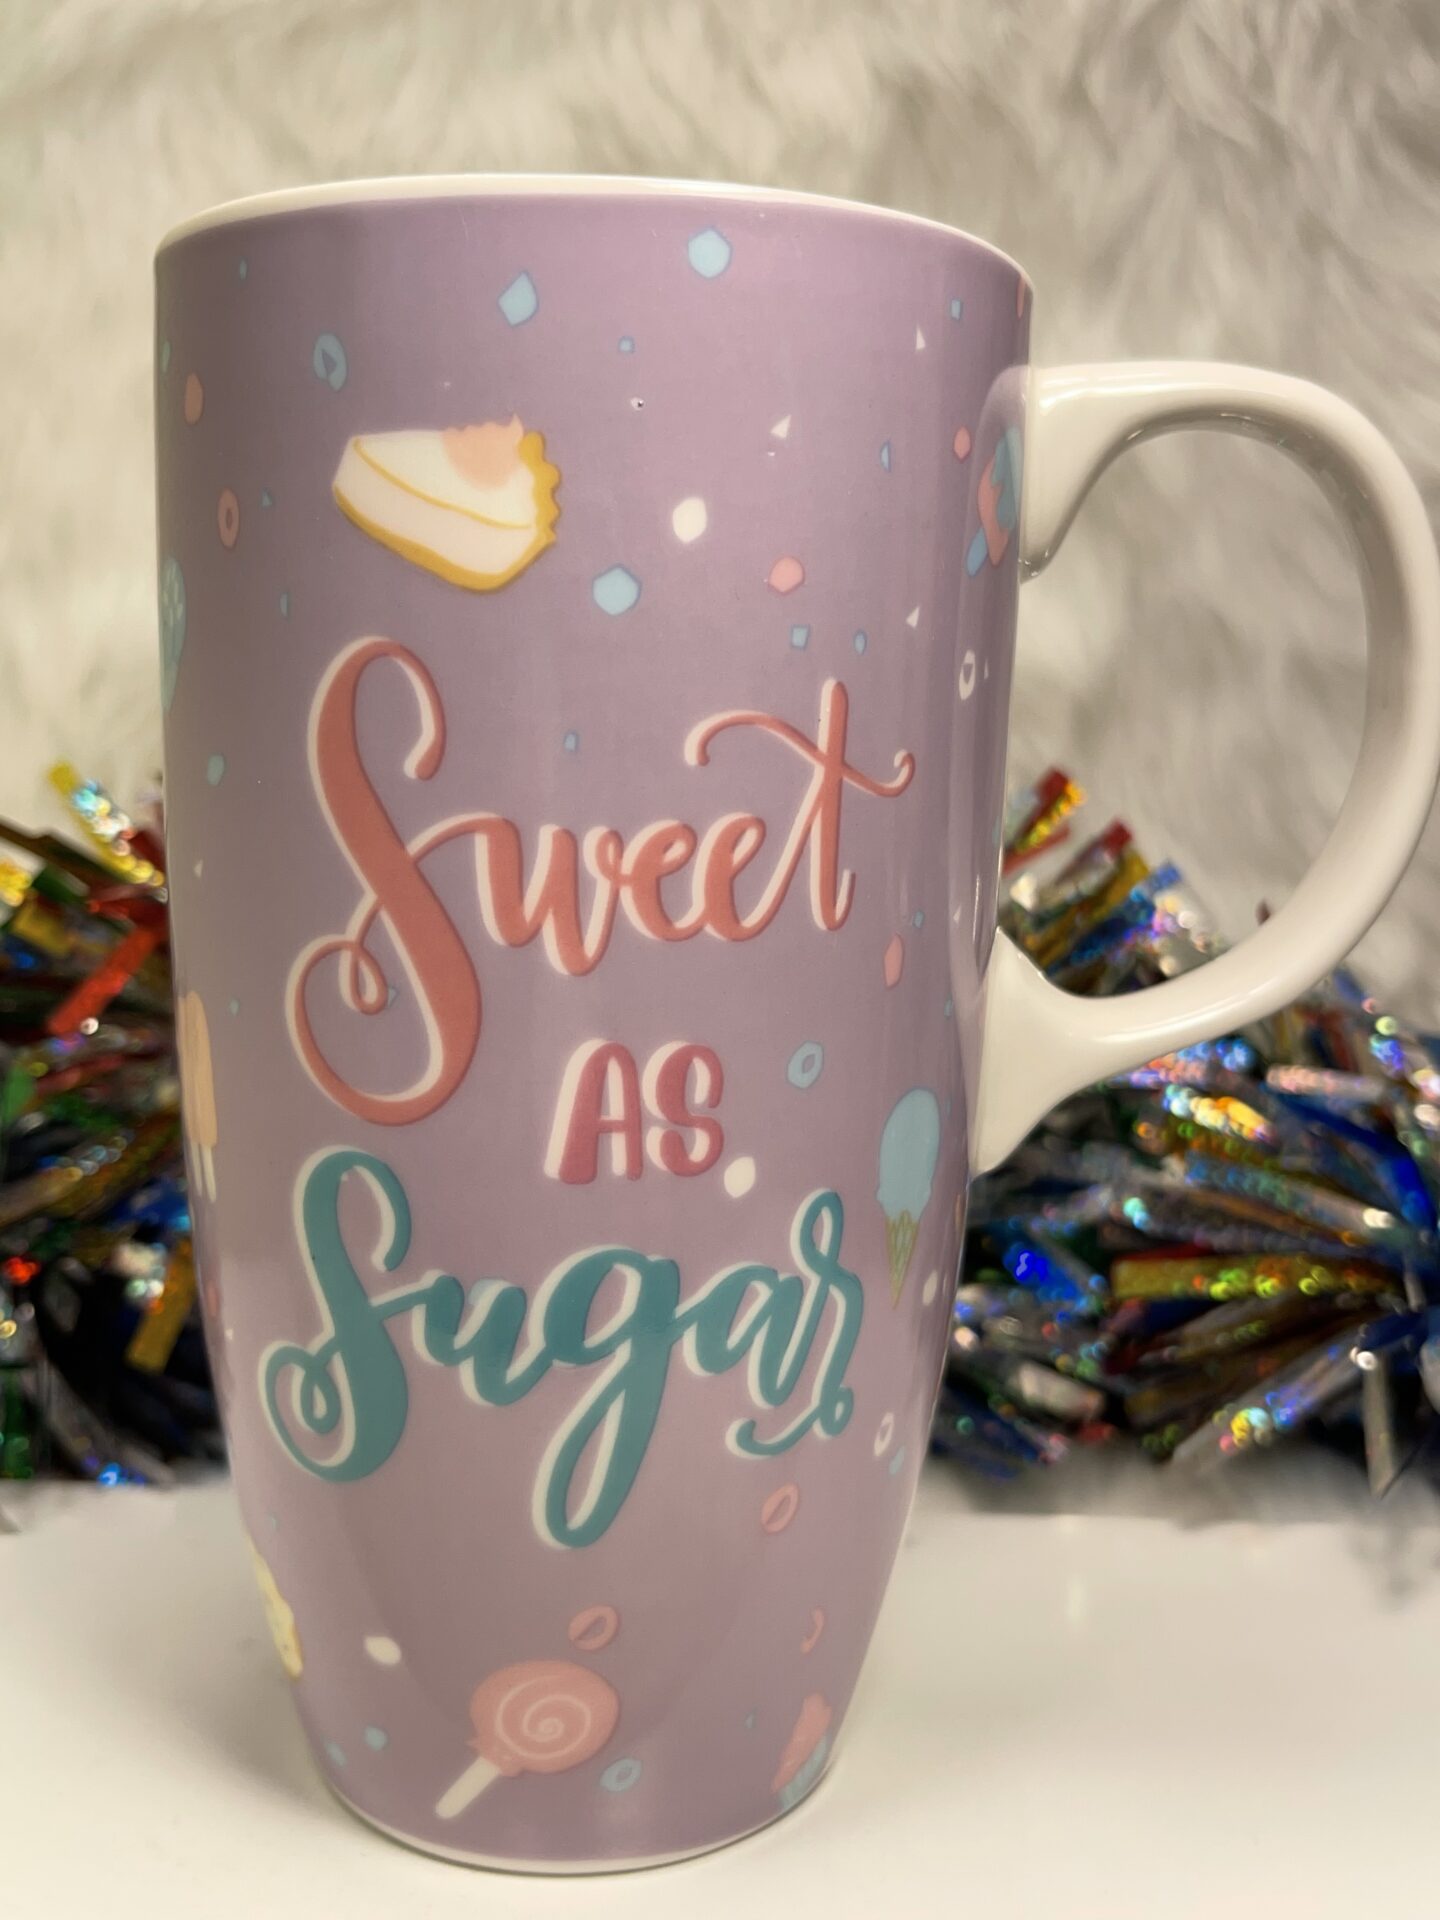 Sweet As Sugar Lavender Latte Mug with Sweet Treats Coffee Cup for